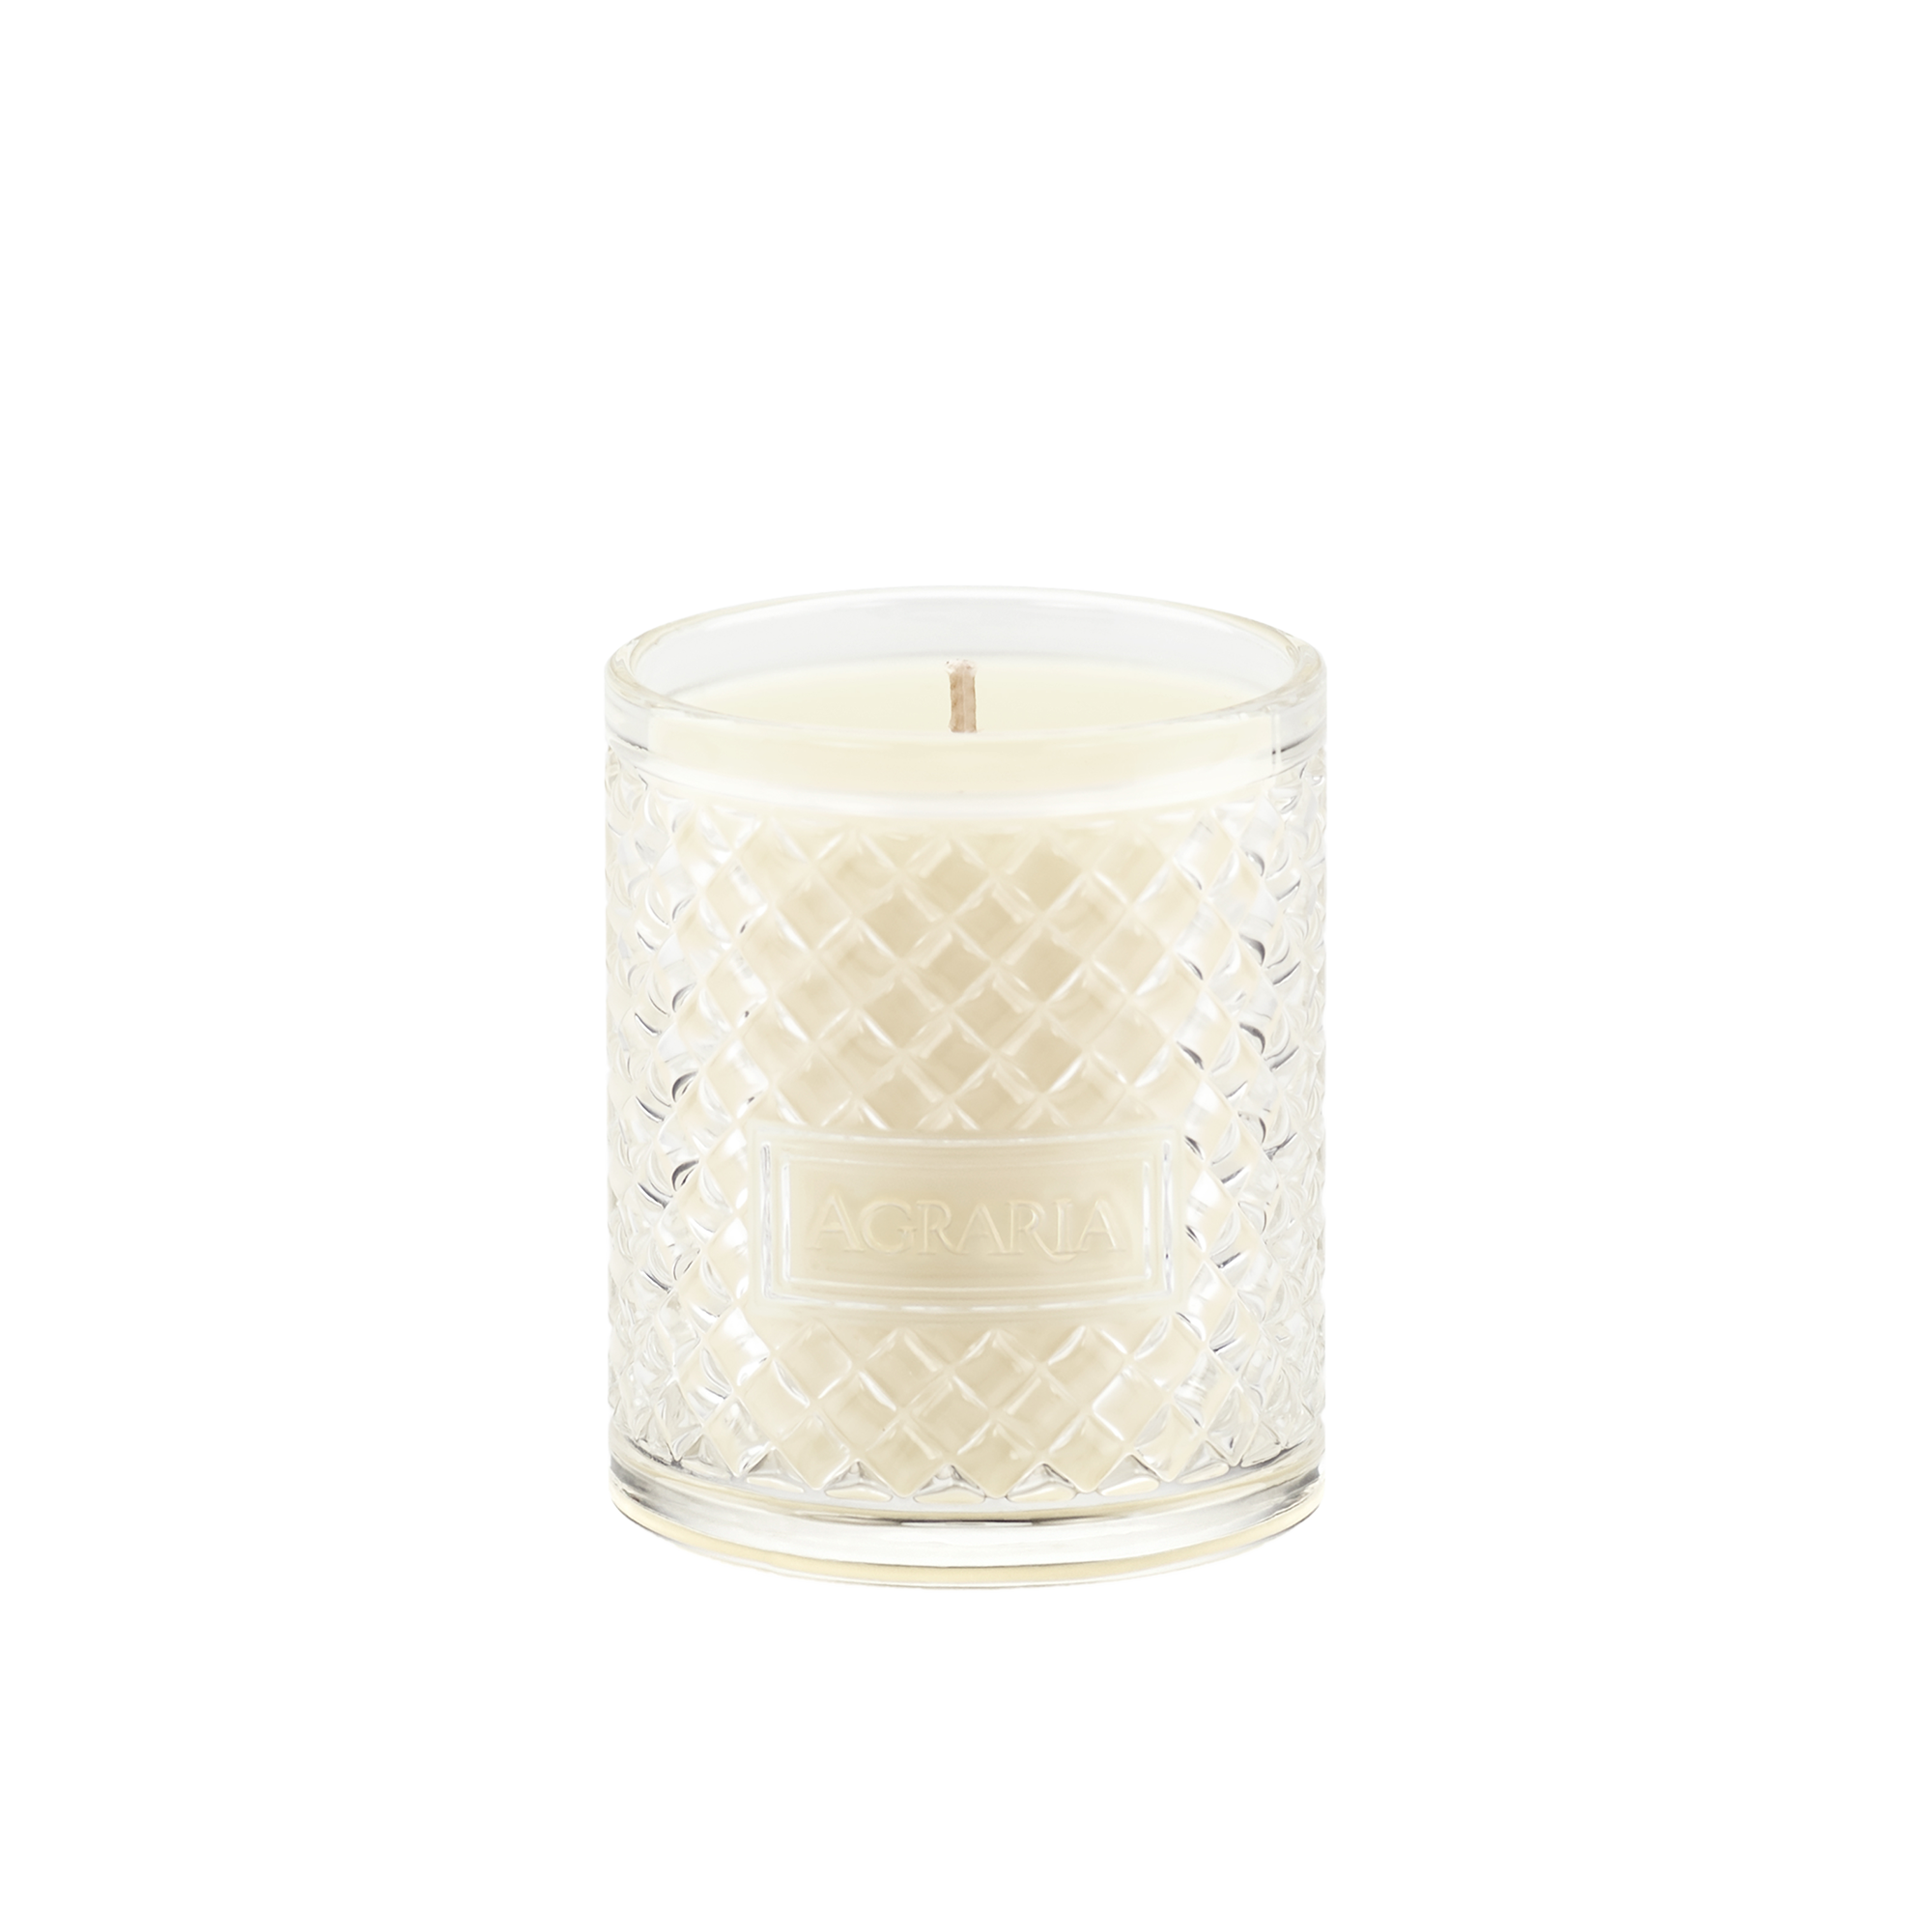 Balsam Scented Candle